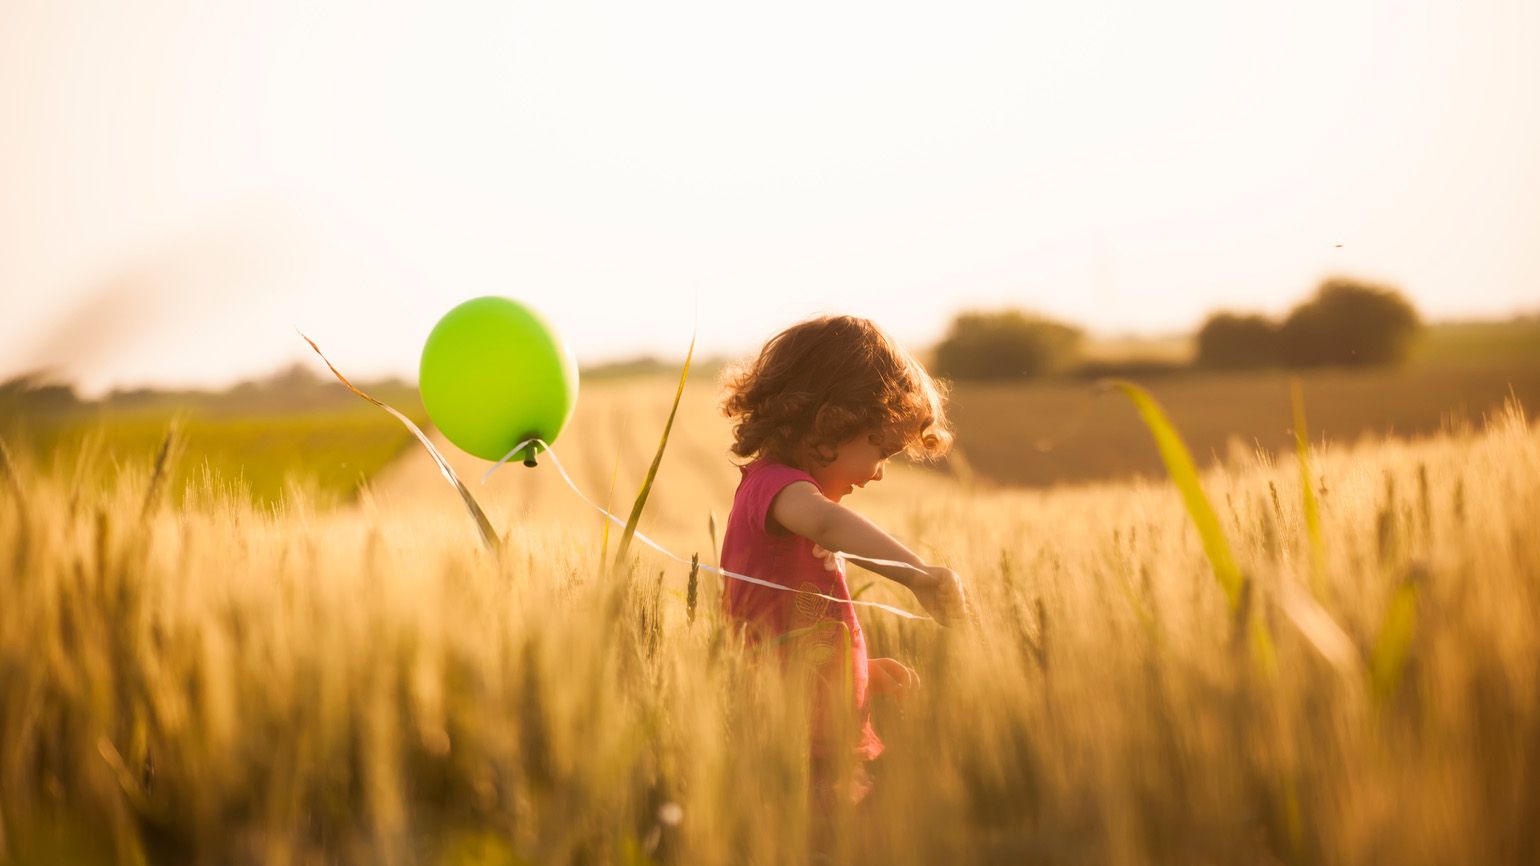 Young child frolicking in a field with a green balloon; Getty Images